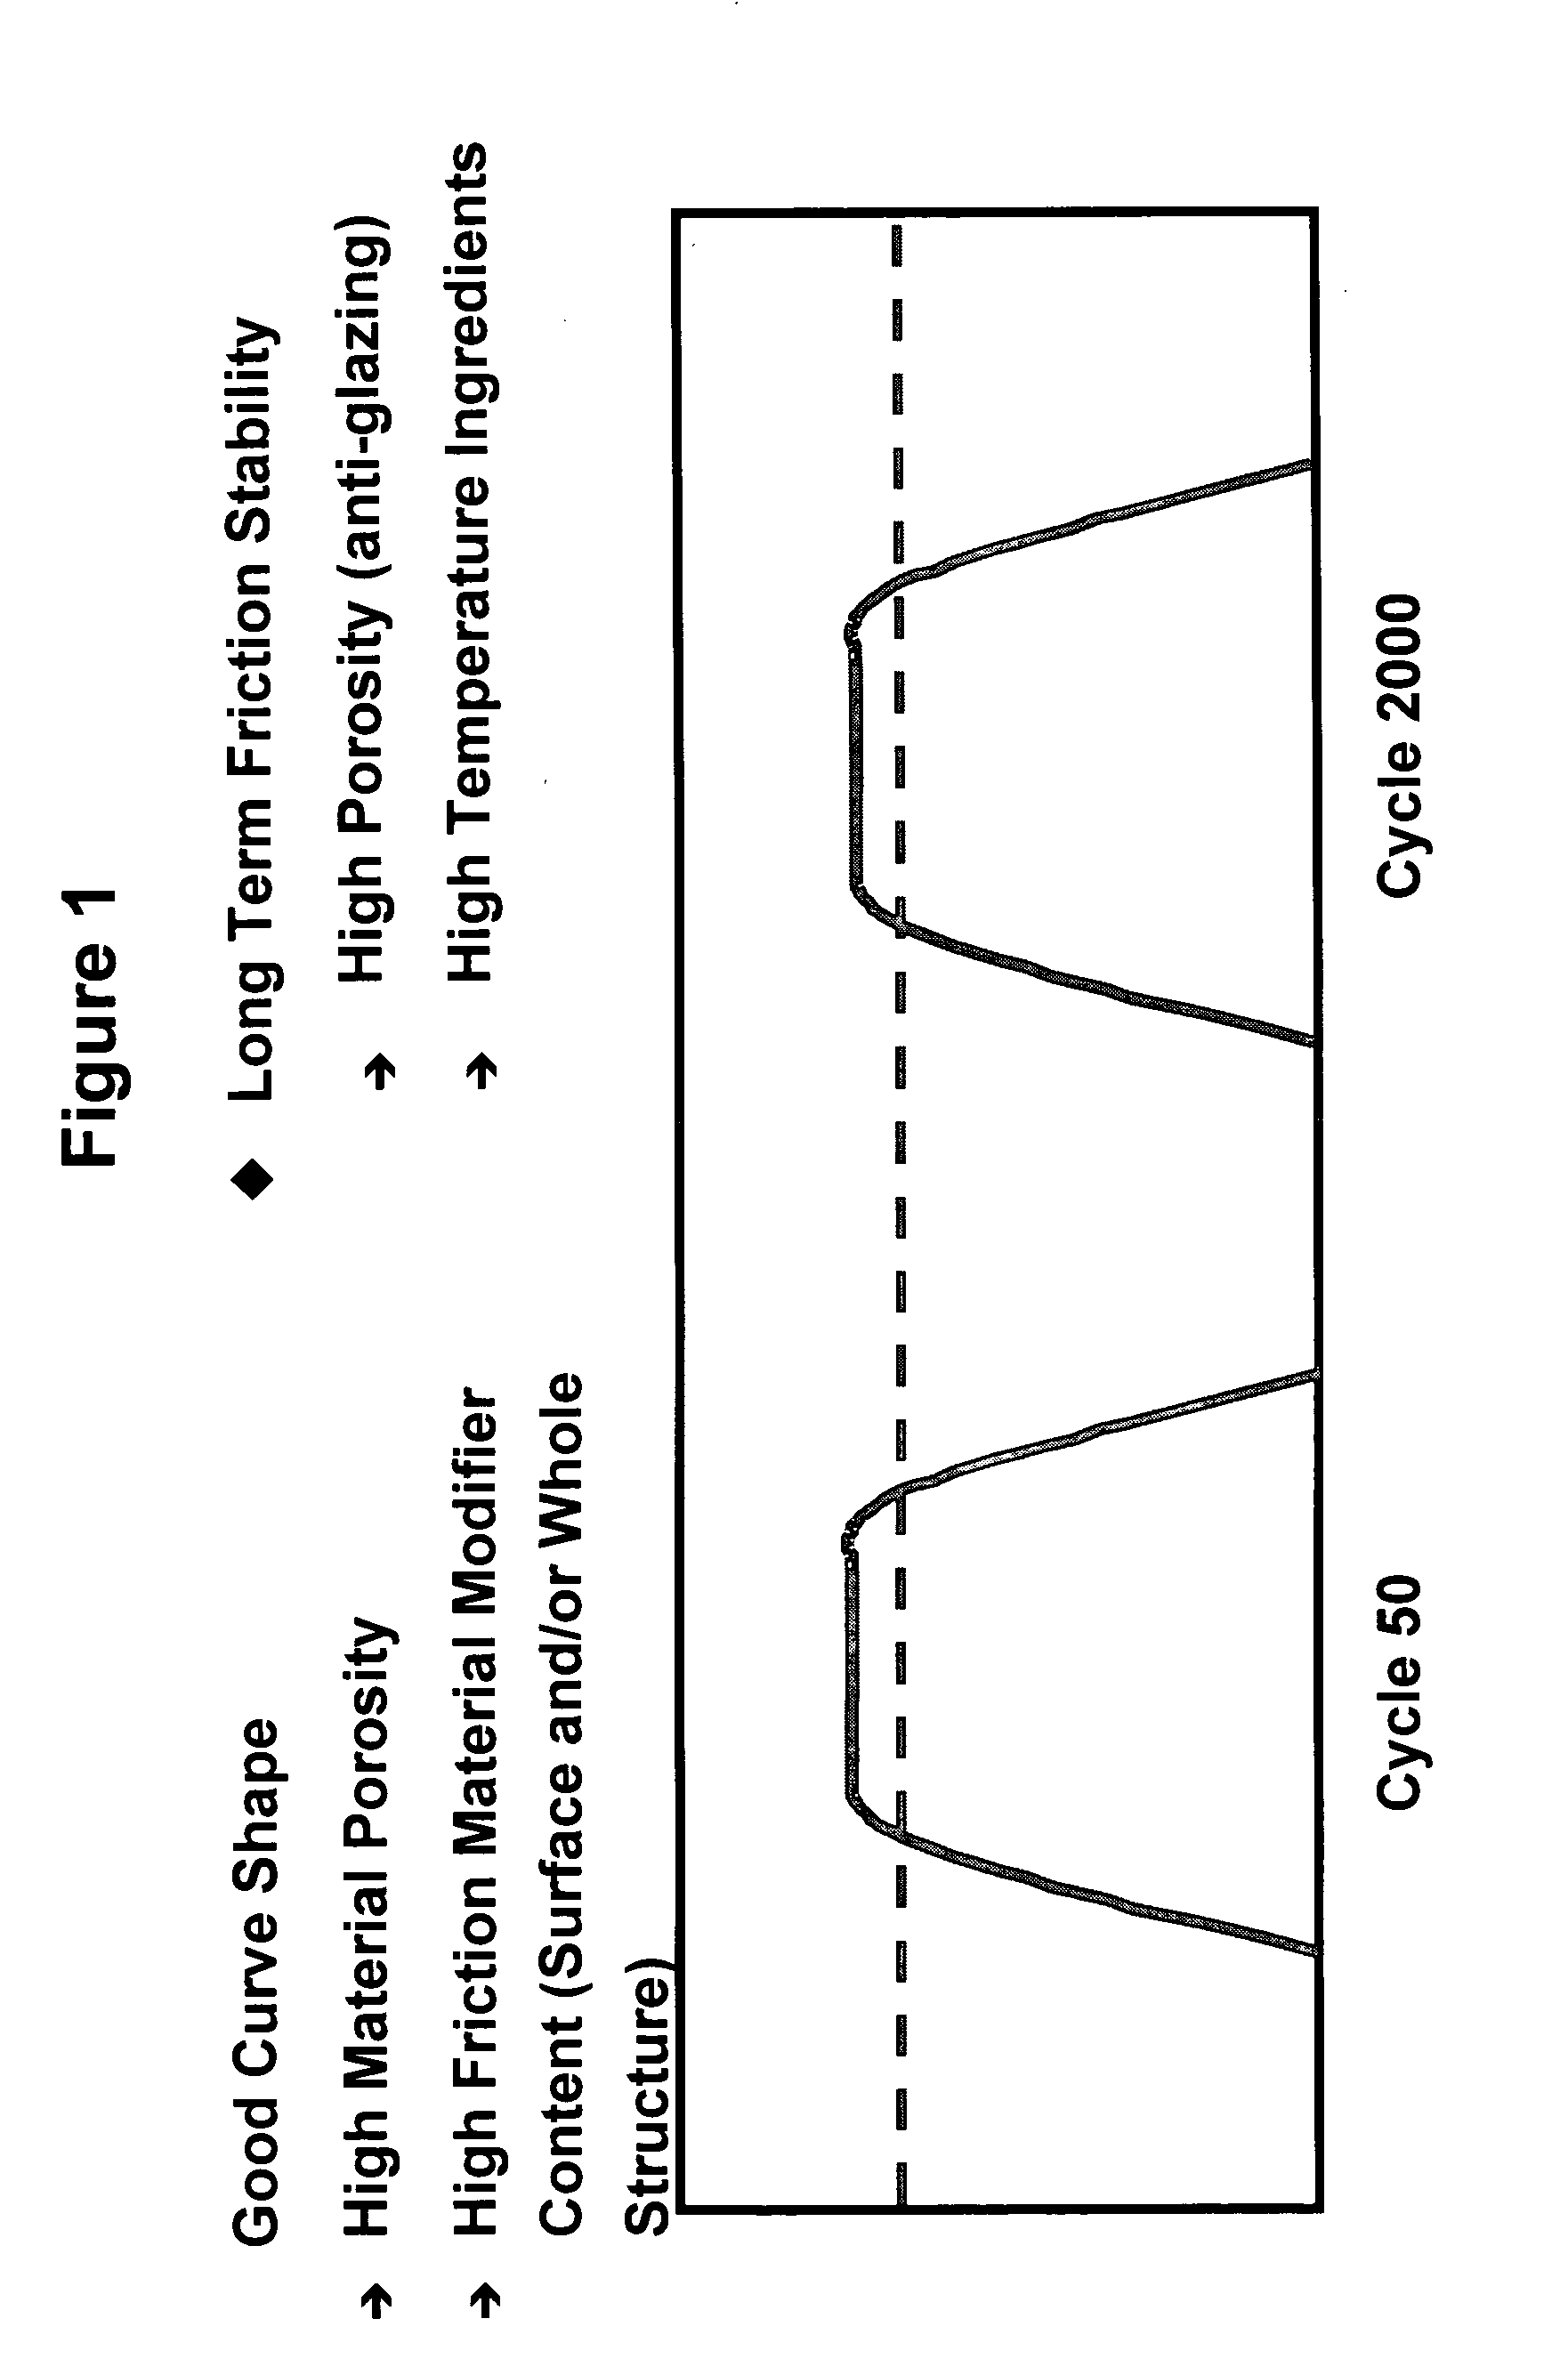 Friction material containing partially carbonized carbon fibers